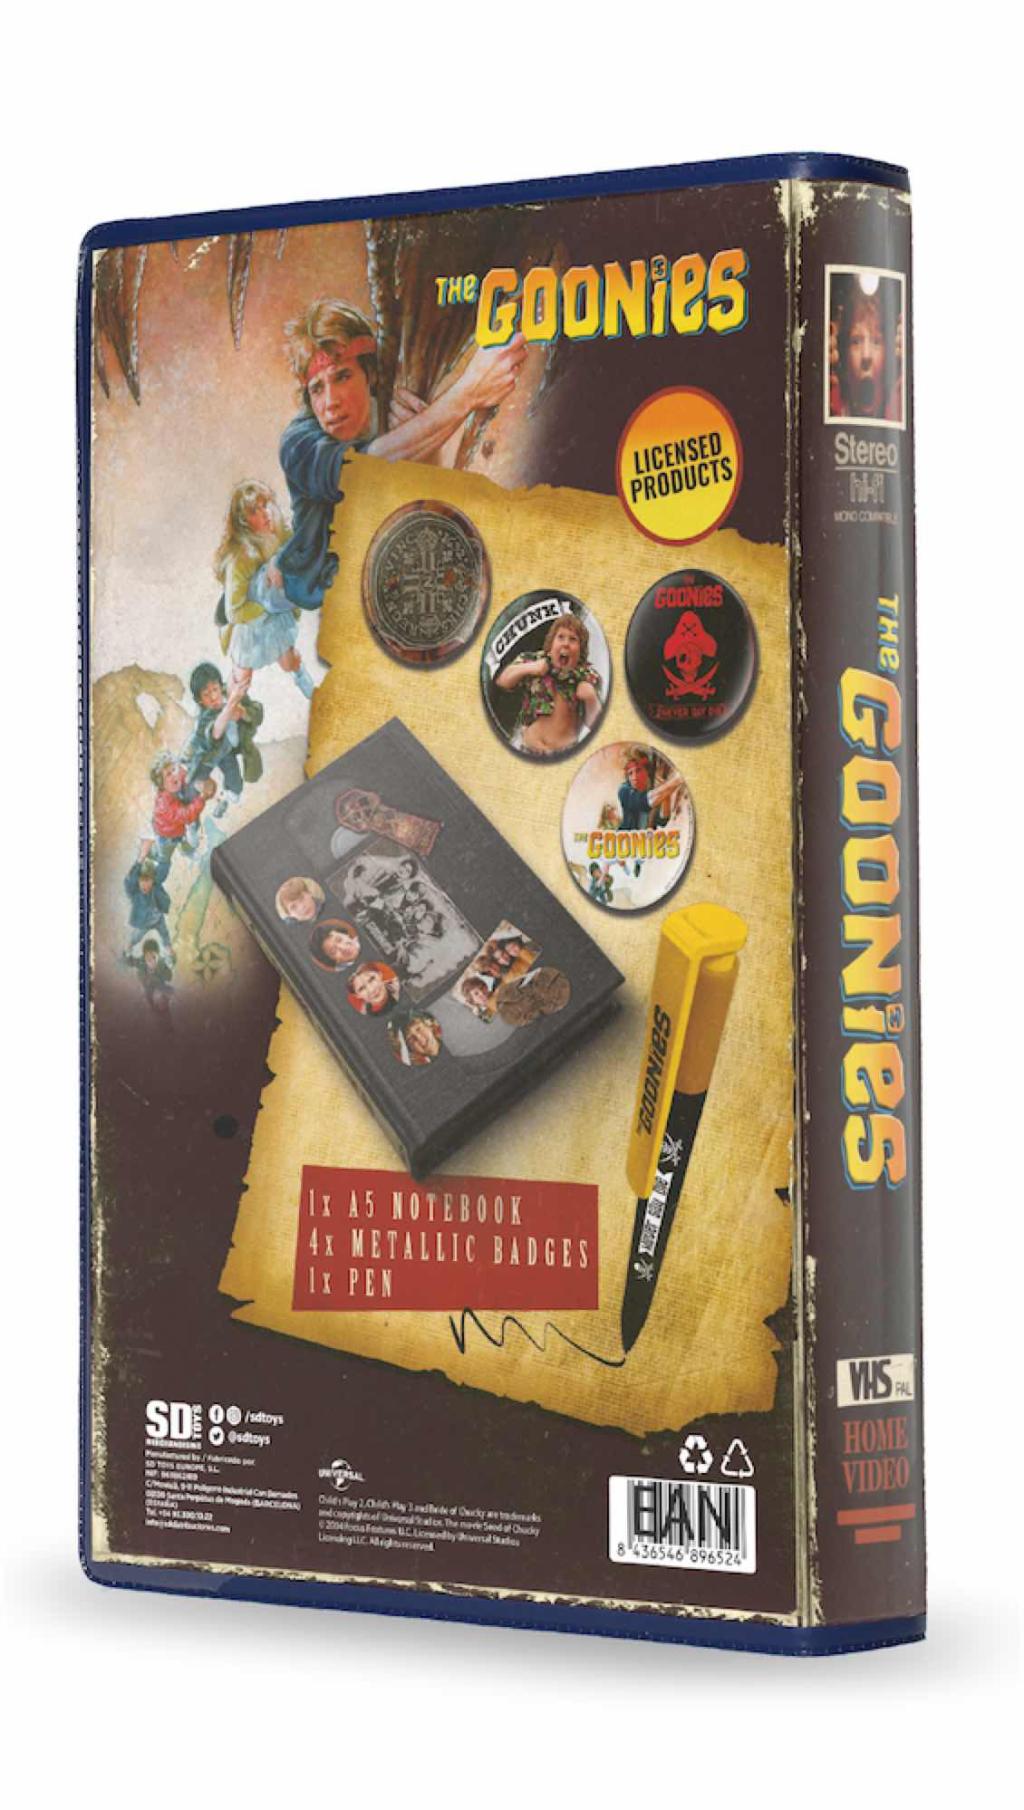 THE GOONIES - Set VHS - Stationery Set (Notebook, Badges and Pen)